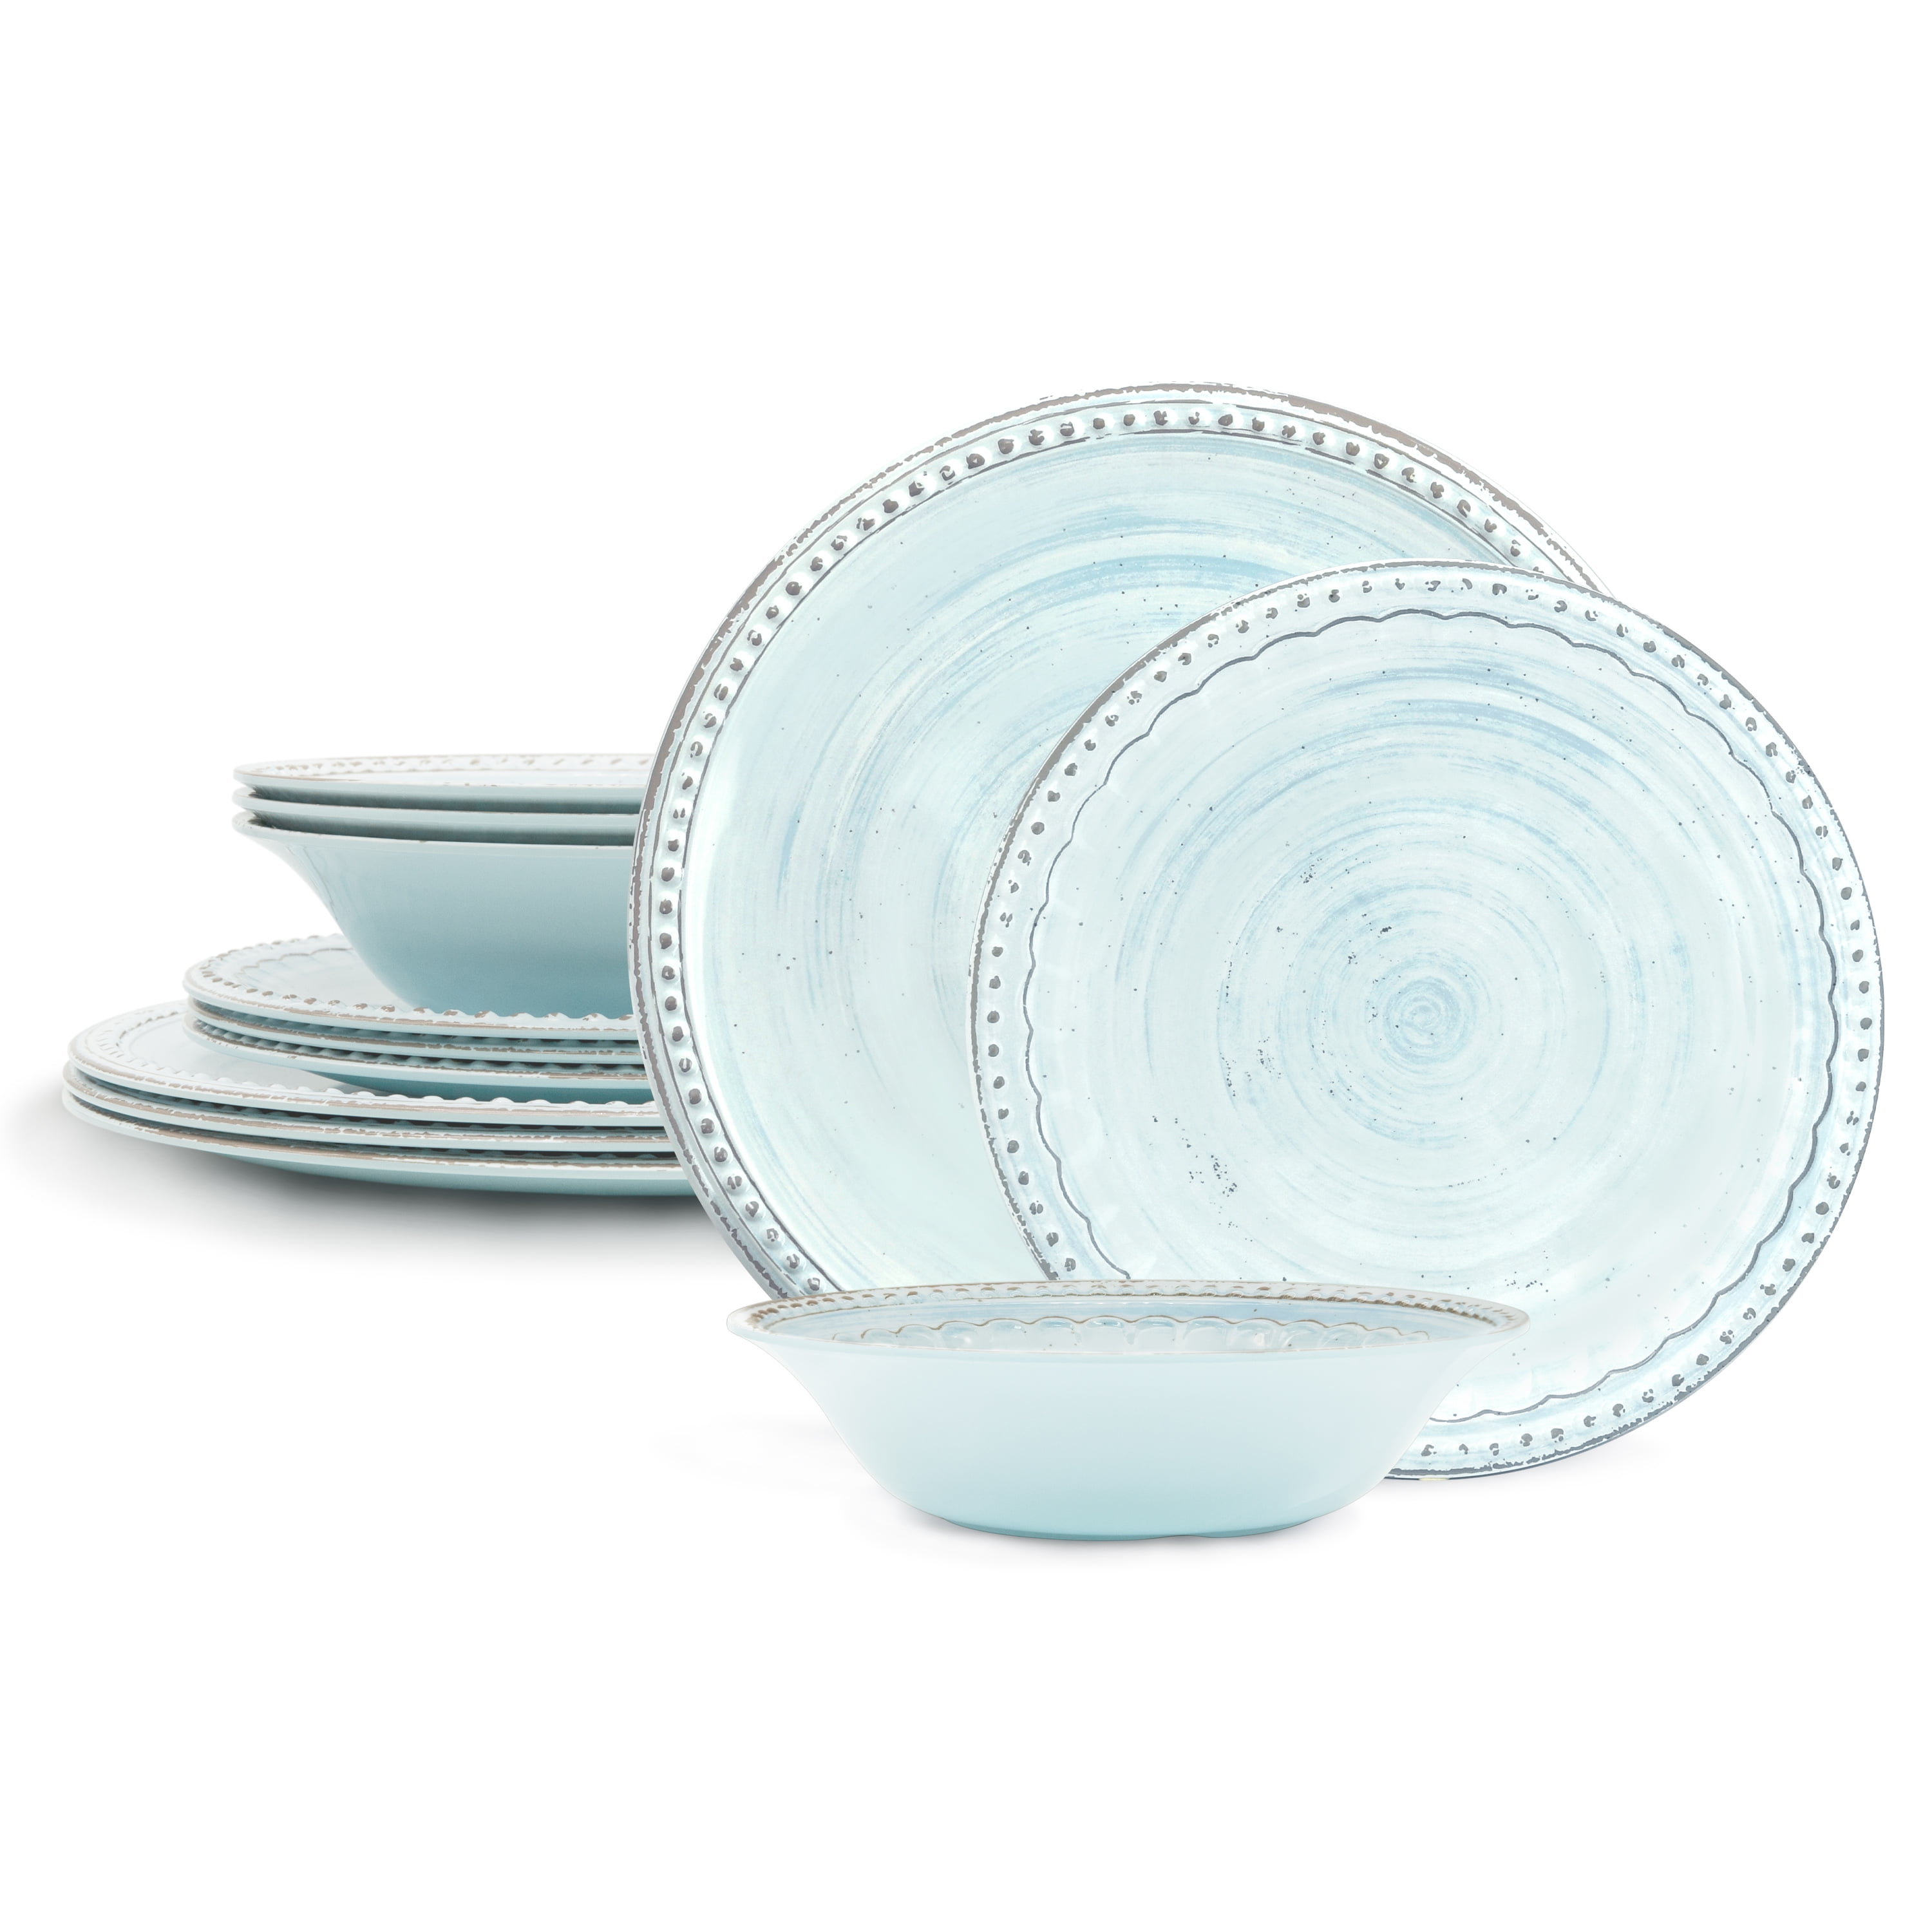 Zak Designs French Country House Dinnerware 12 Pieces Melamine Set Includes Dinner, Salad Plates and Individual Bowls